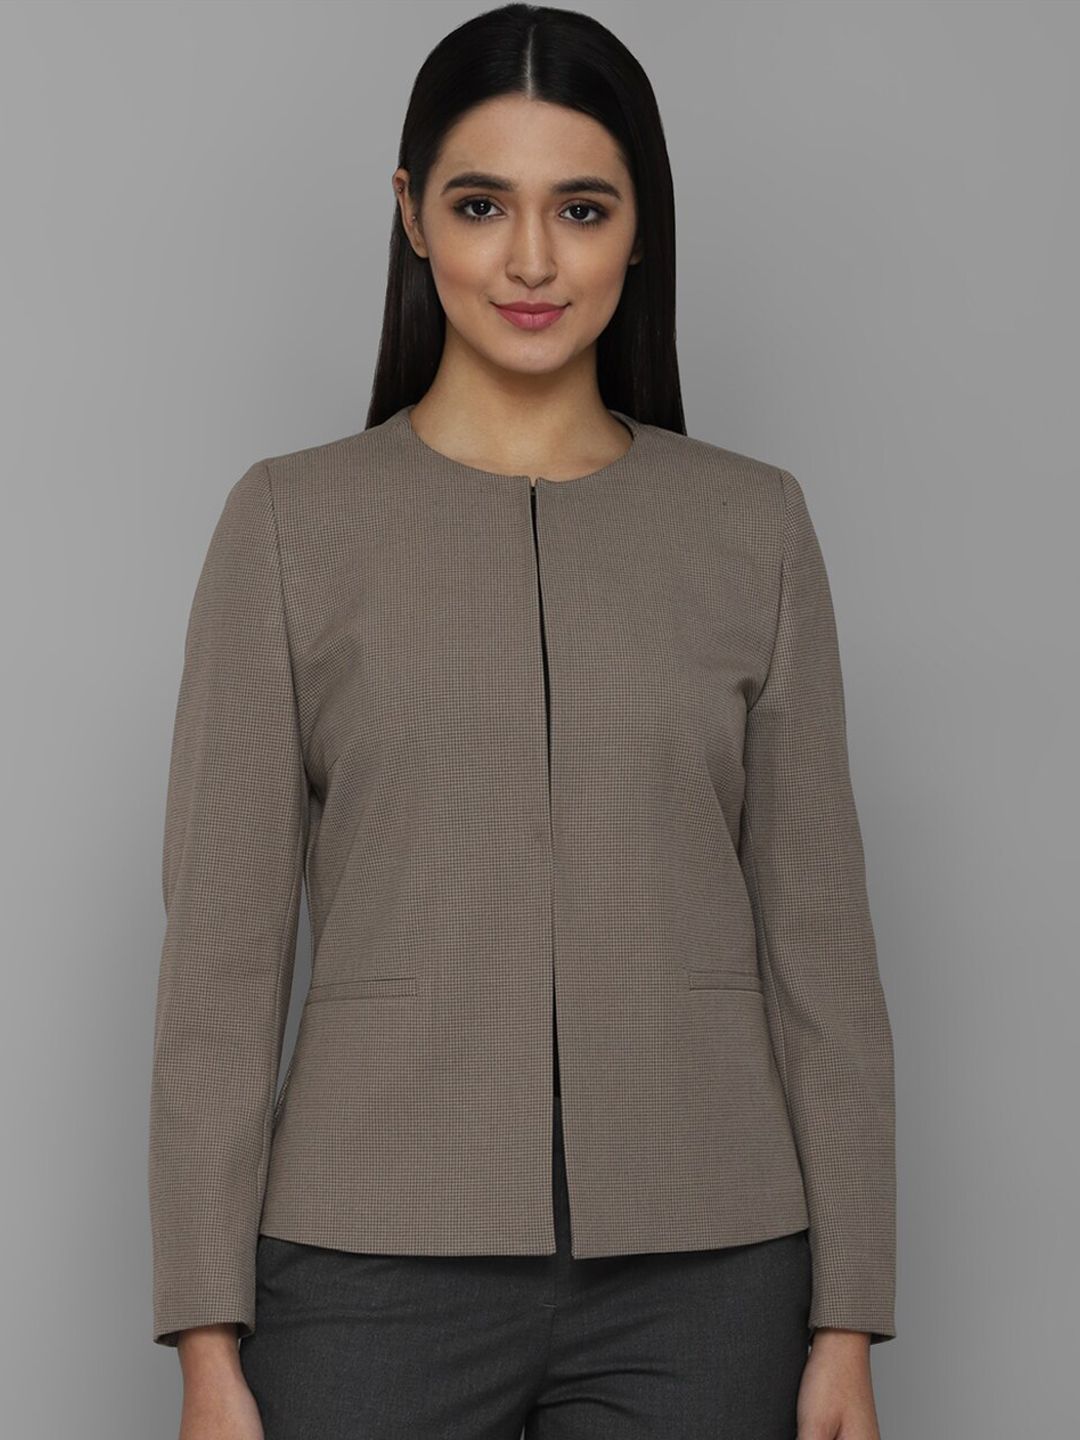 Allen Solly Woman Brown Checked Single Breasted Casual Blazer Price in India